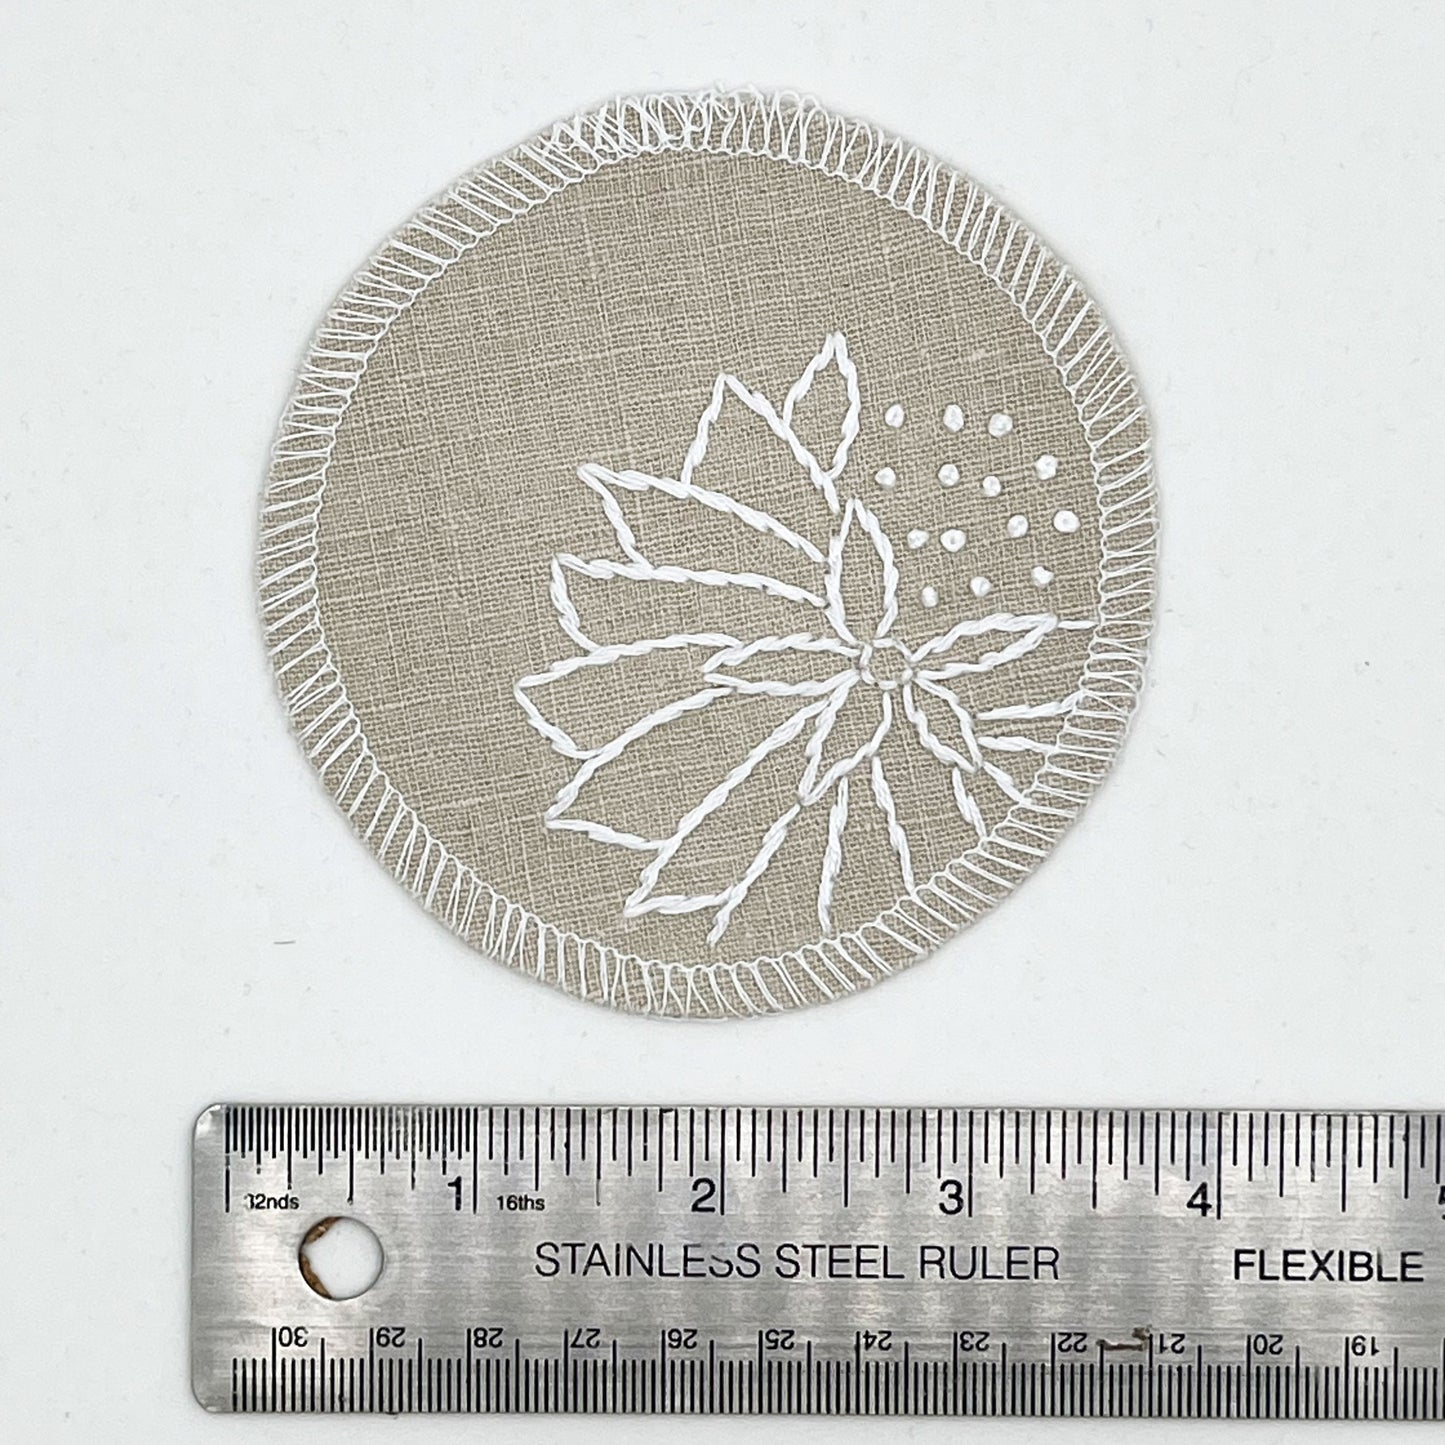 a circle shaped patch made out of natural colored cotton linen fabric, hand embroidered with an abstract dandelion in white colored floss, outlines of petals, edges overlocked in white, on a white background, placed next to a ruler to show a diameter of 4 inches